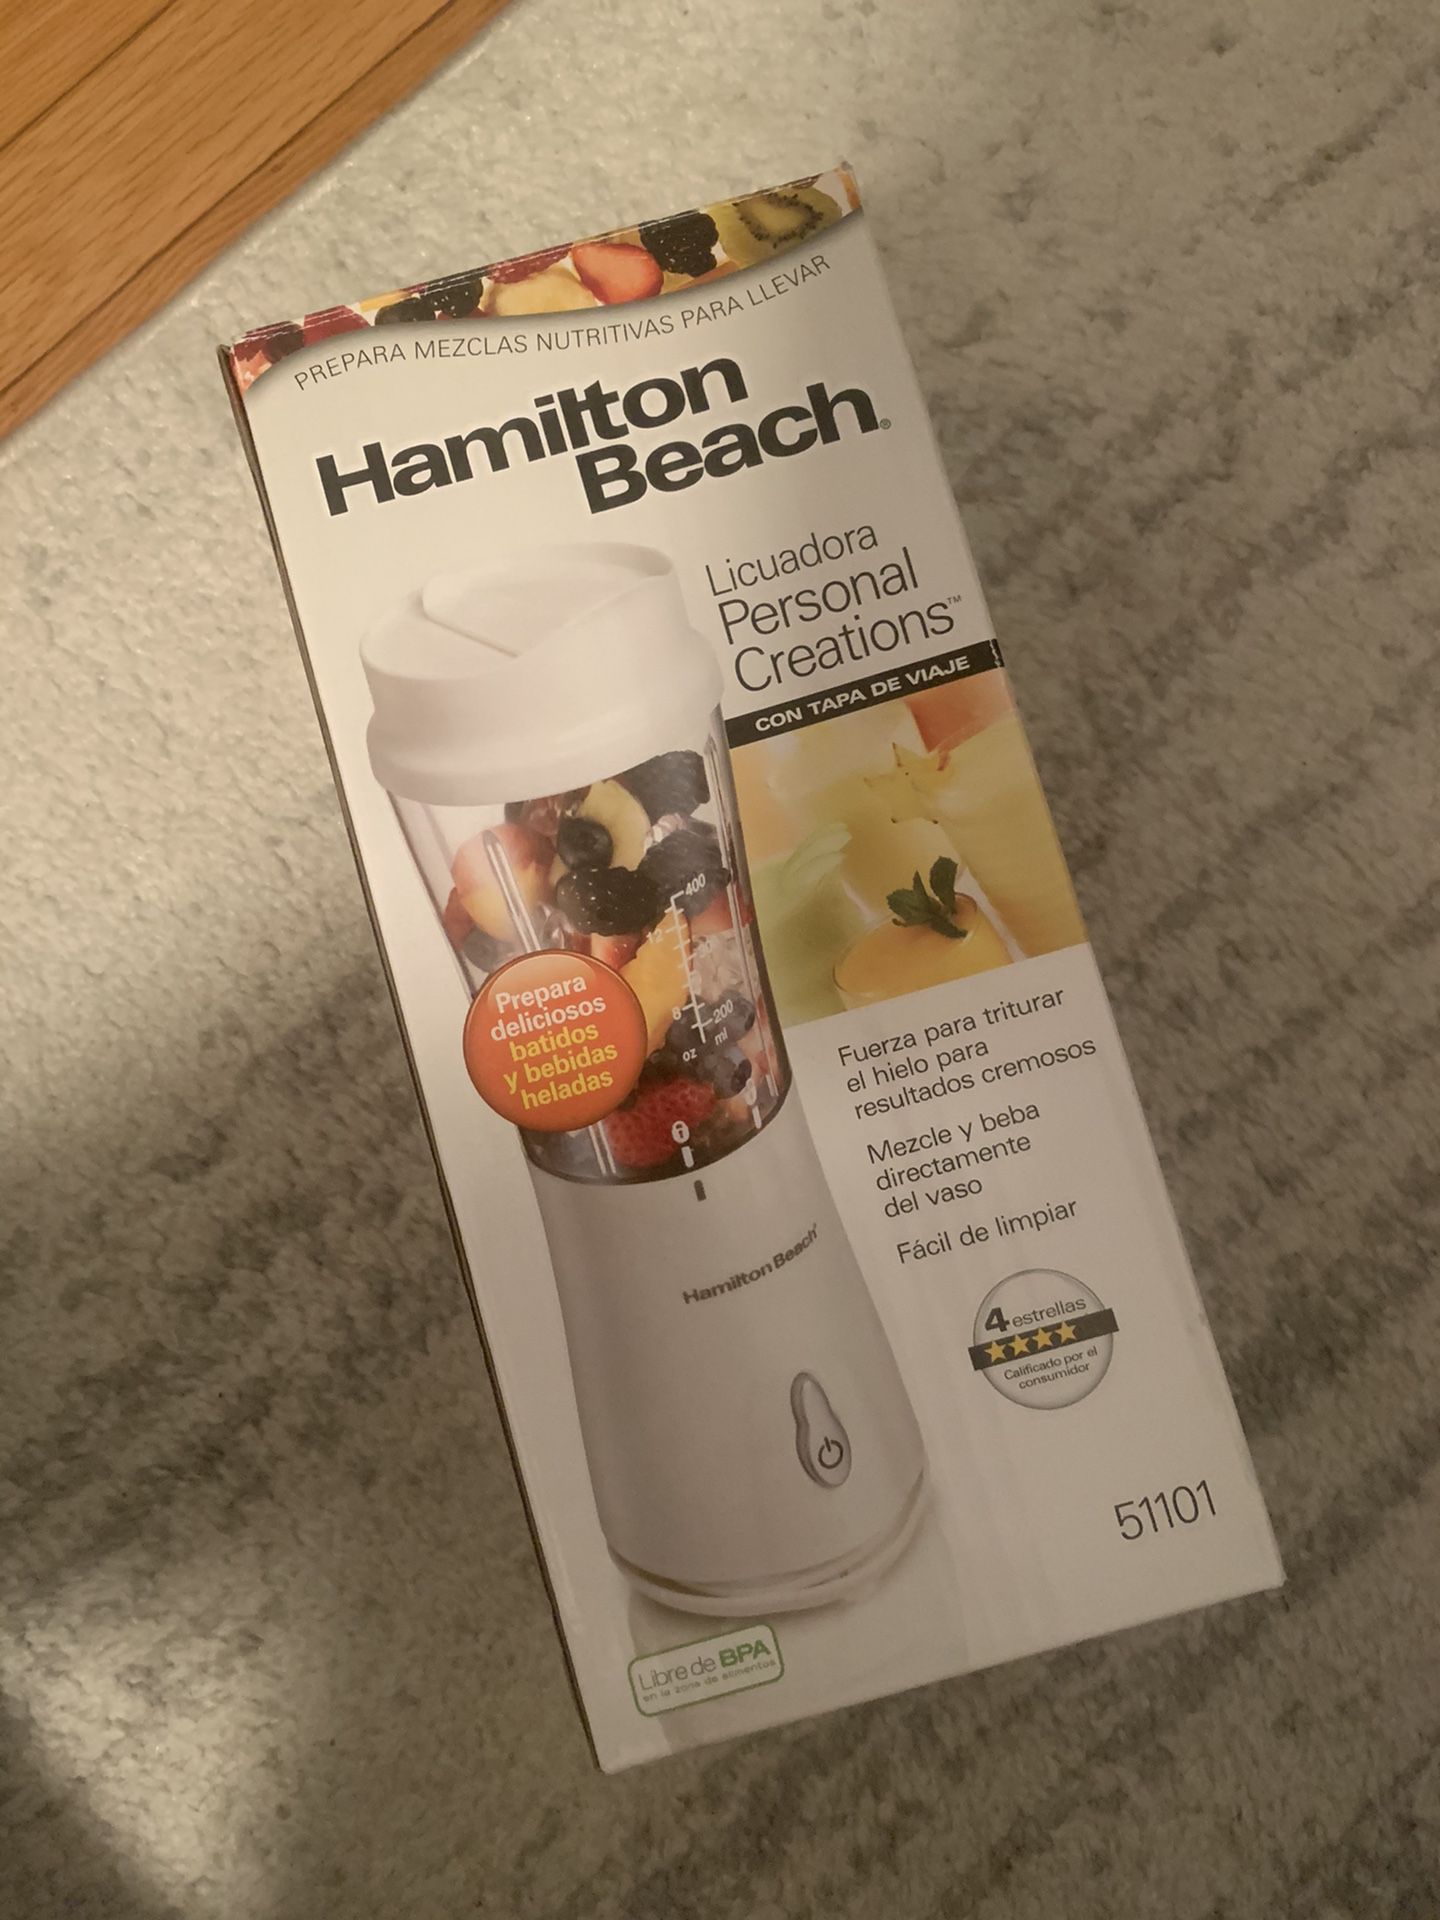 Selling new (box never opened) smoothie blender